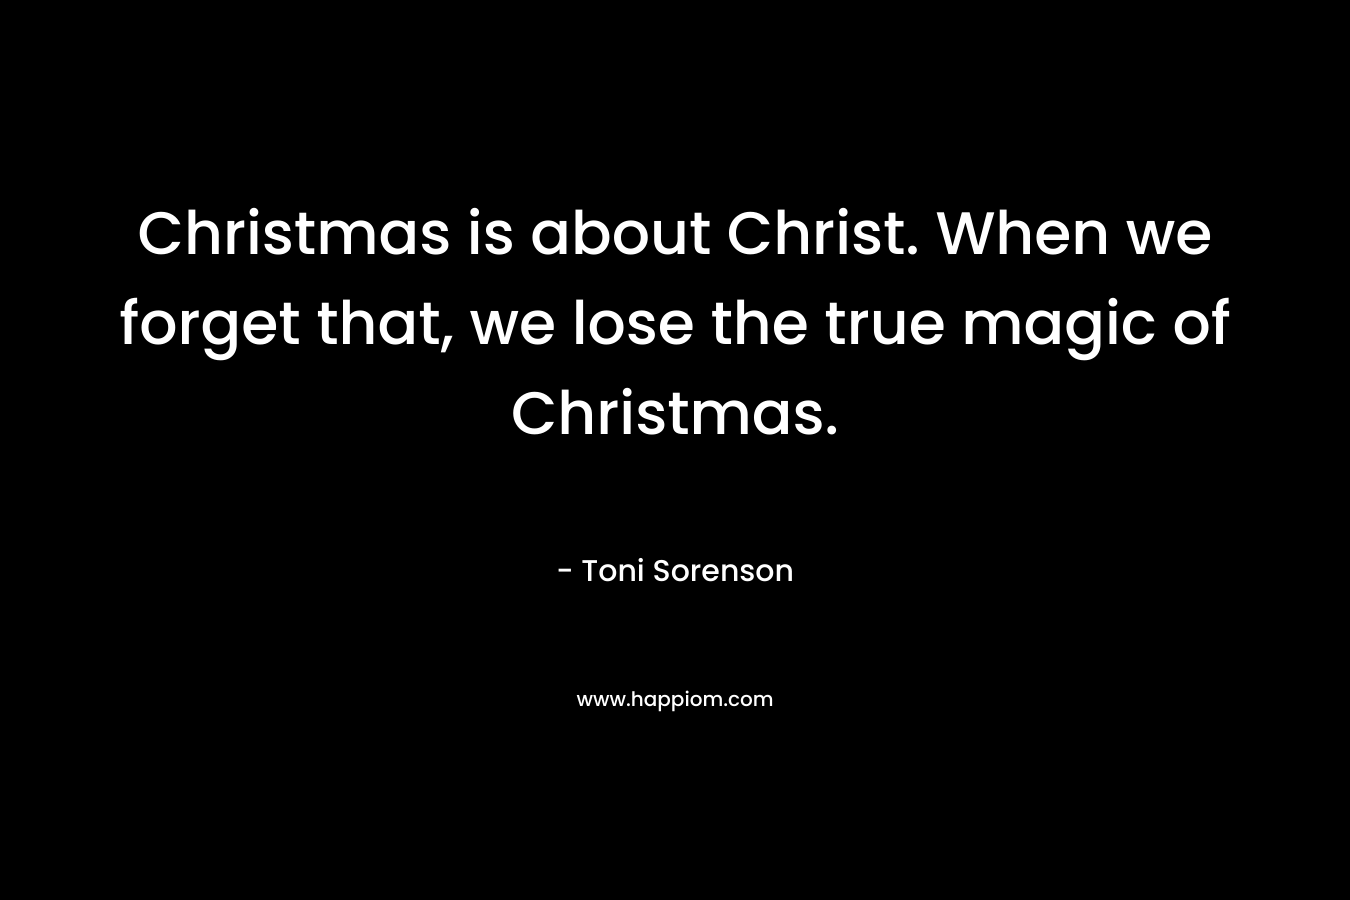 Christmas is about Christ. When we forget that, we lose the true magic of Christmas.